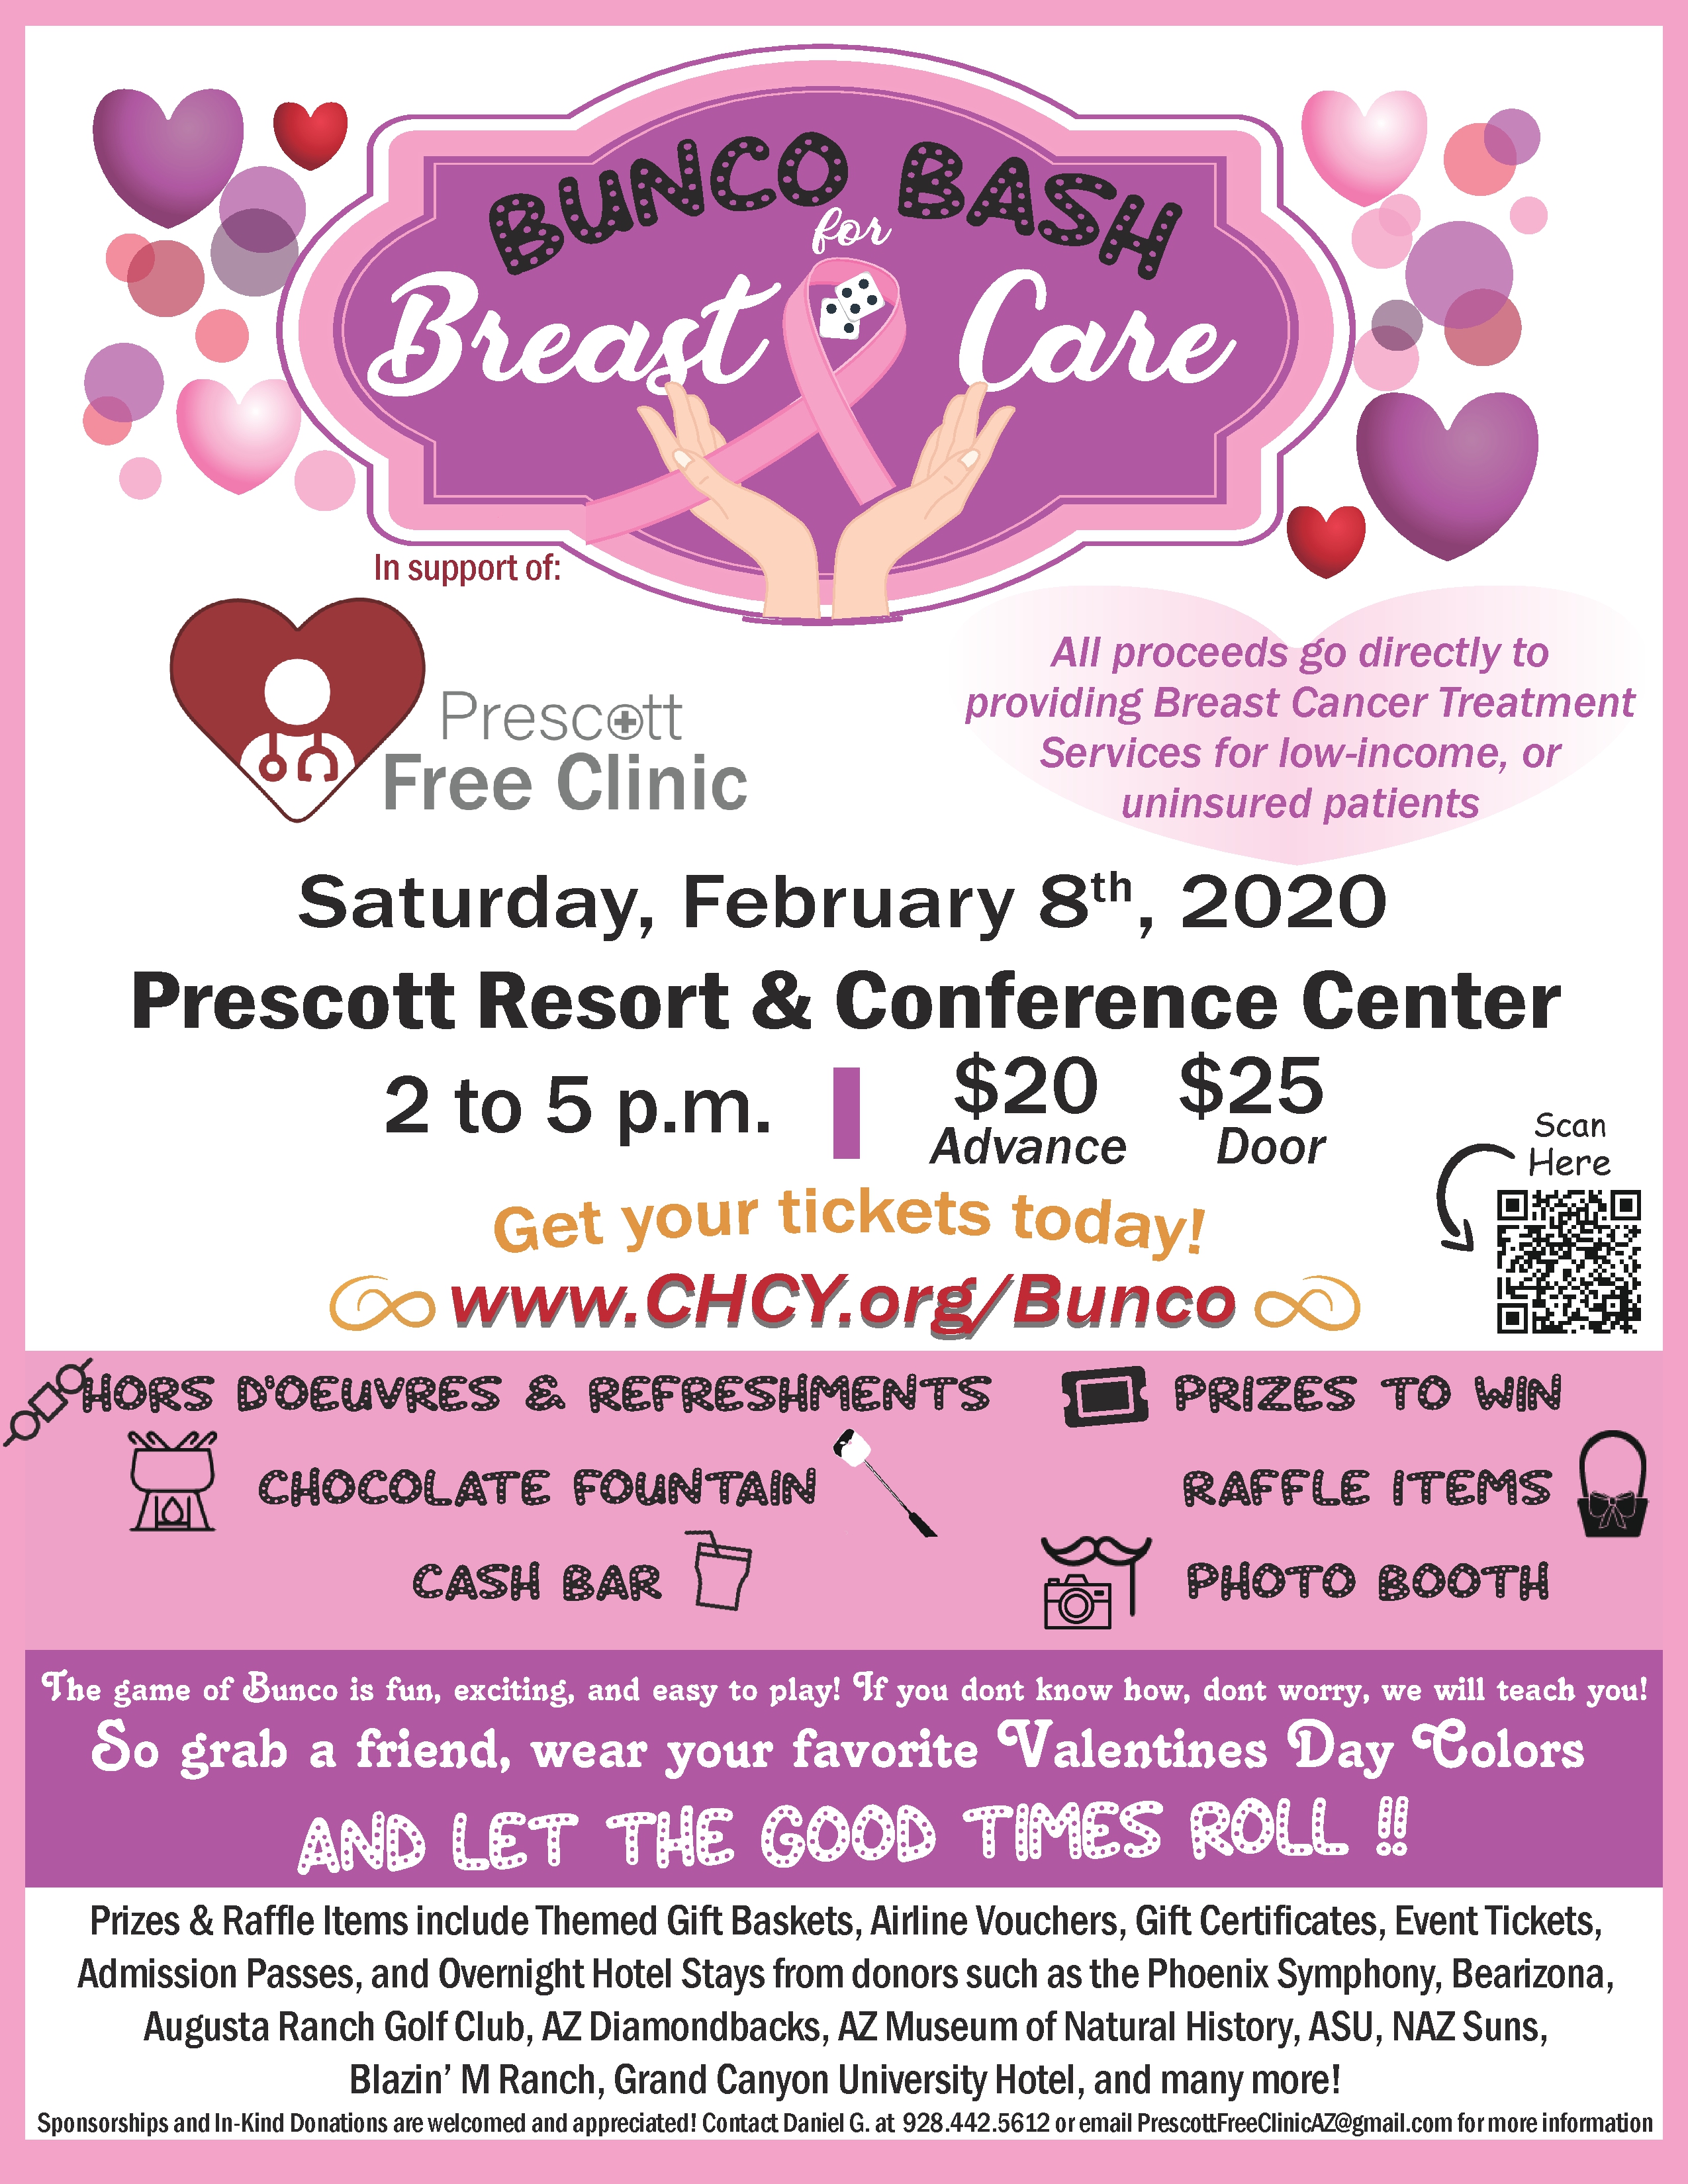 Bunco Bash for Breast Care flyer